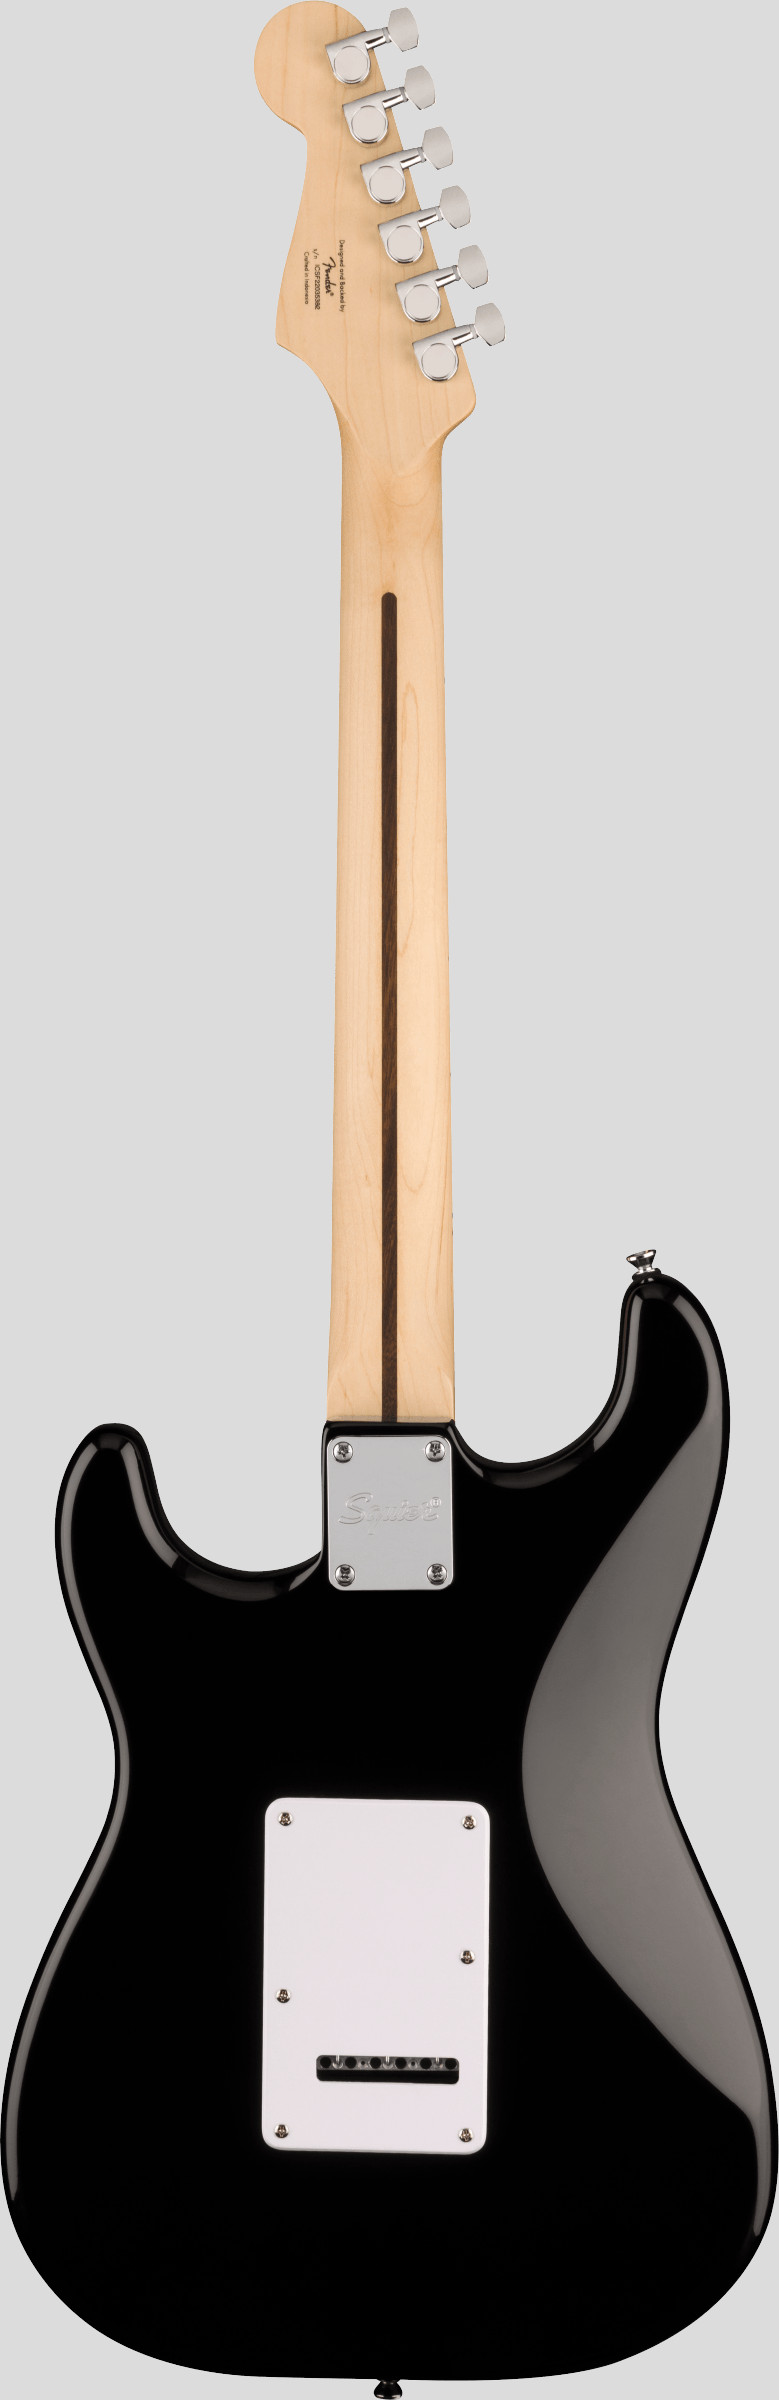 Squier by Fender Sonic Stratocaster Black 2